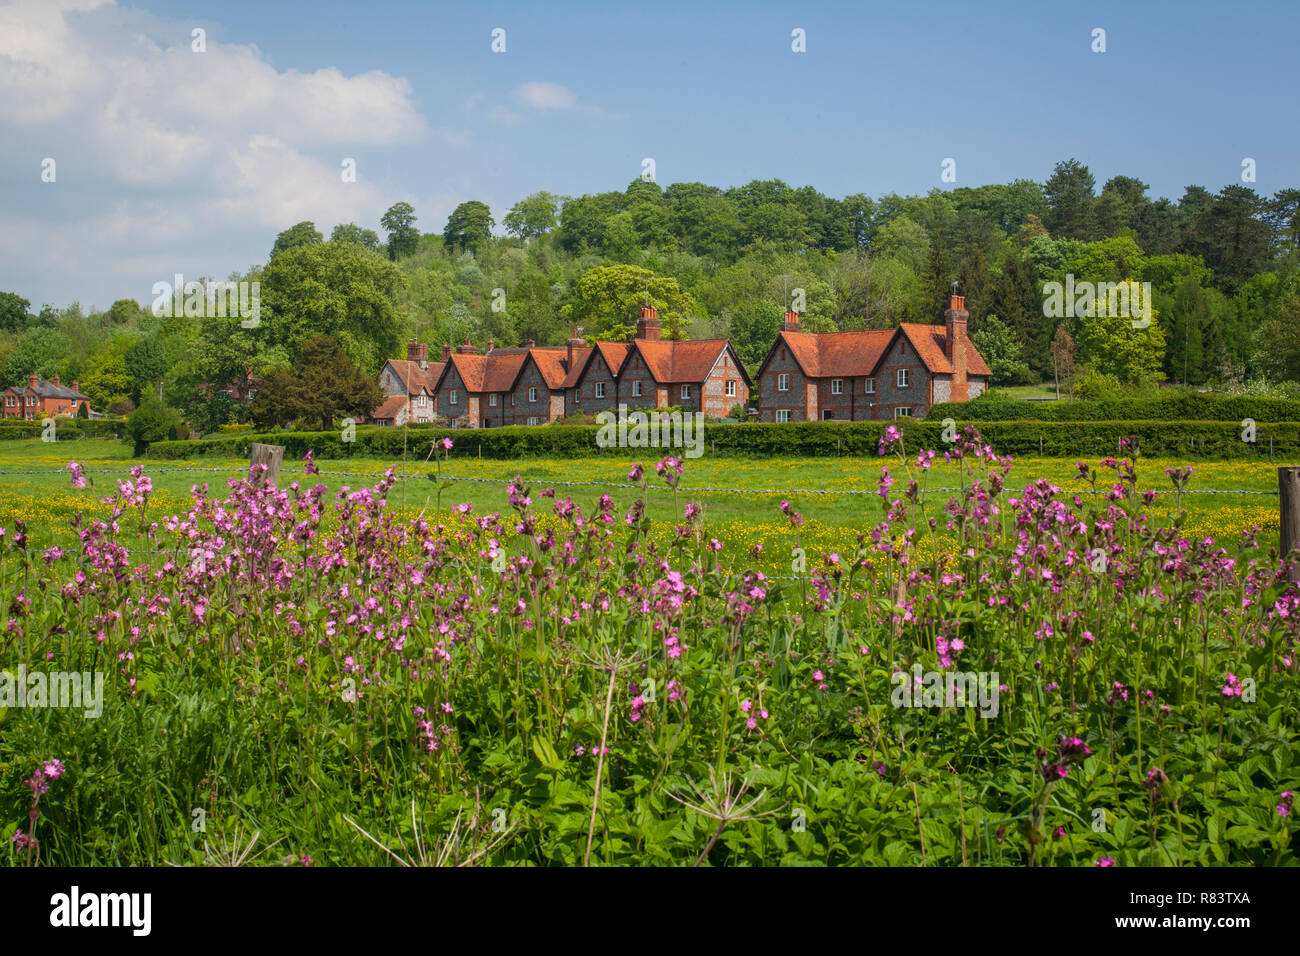 Traditional brick and flint cottages at Hambleden, Buckinghamshire with pink wild flowers in the foreground Stock Photo